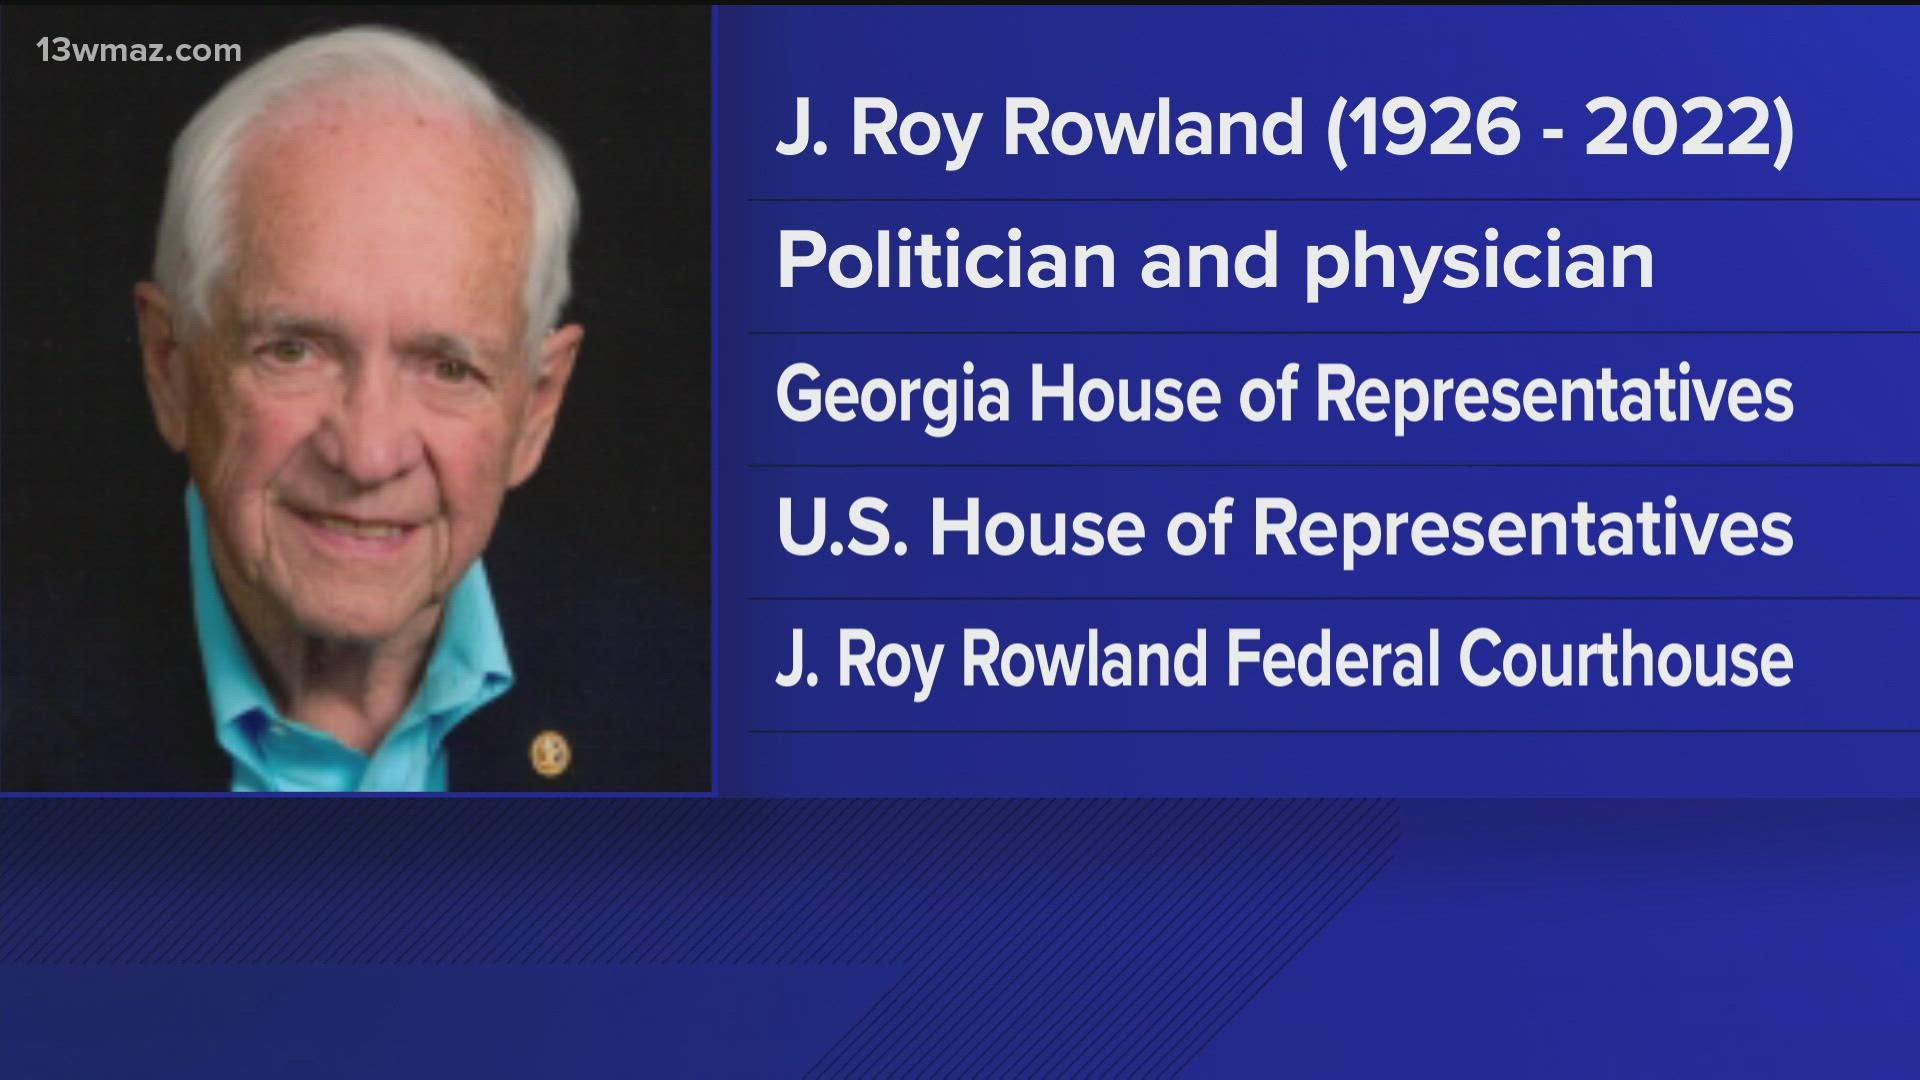 The former Representative served in the state legislature from 1976 to 1982.